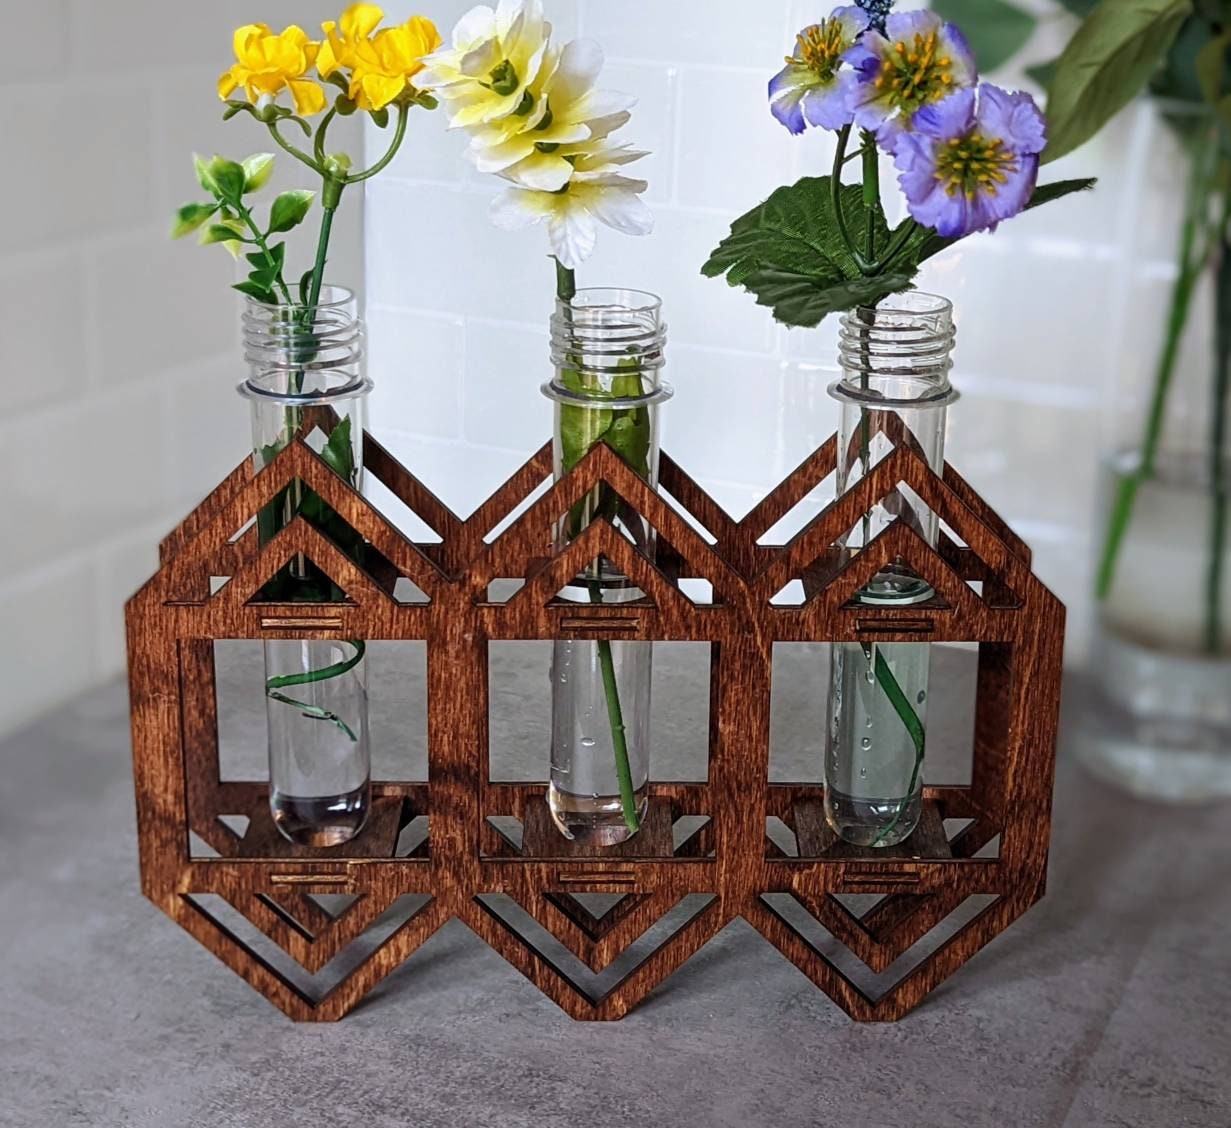 Mid century style mini vase propagation station. Minimalist gift for mom. Gift for sister. Tabletop vase. Wildflower, small House plants